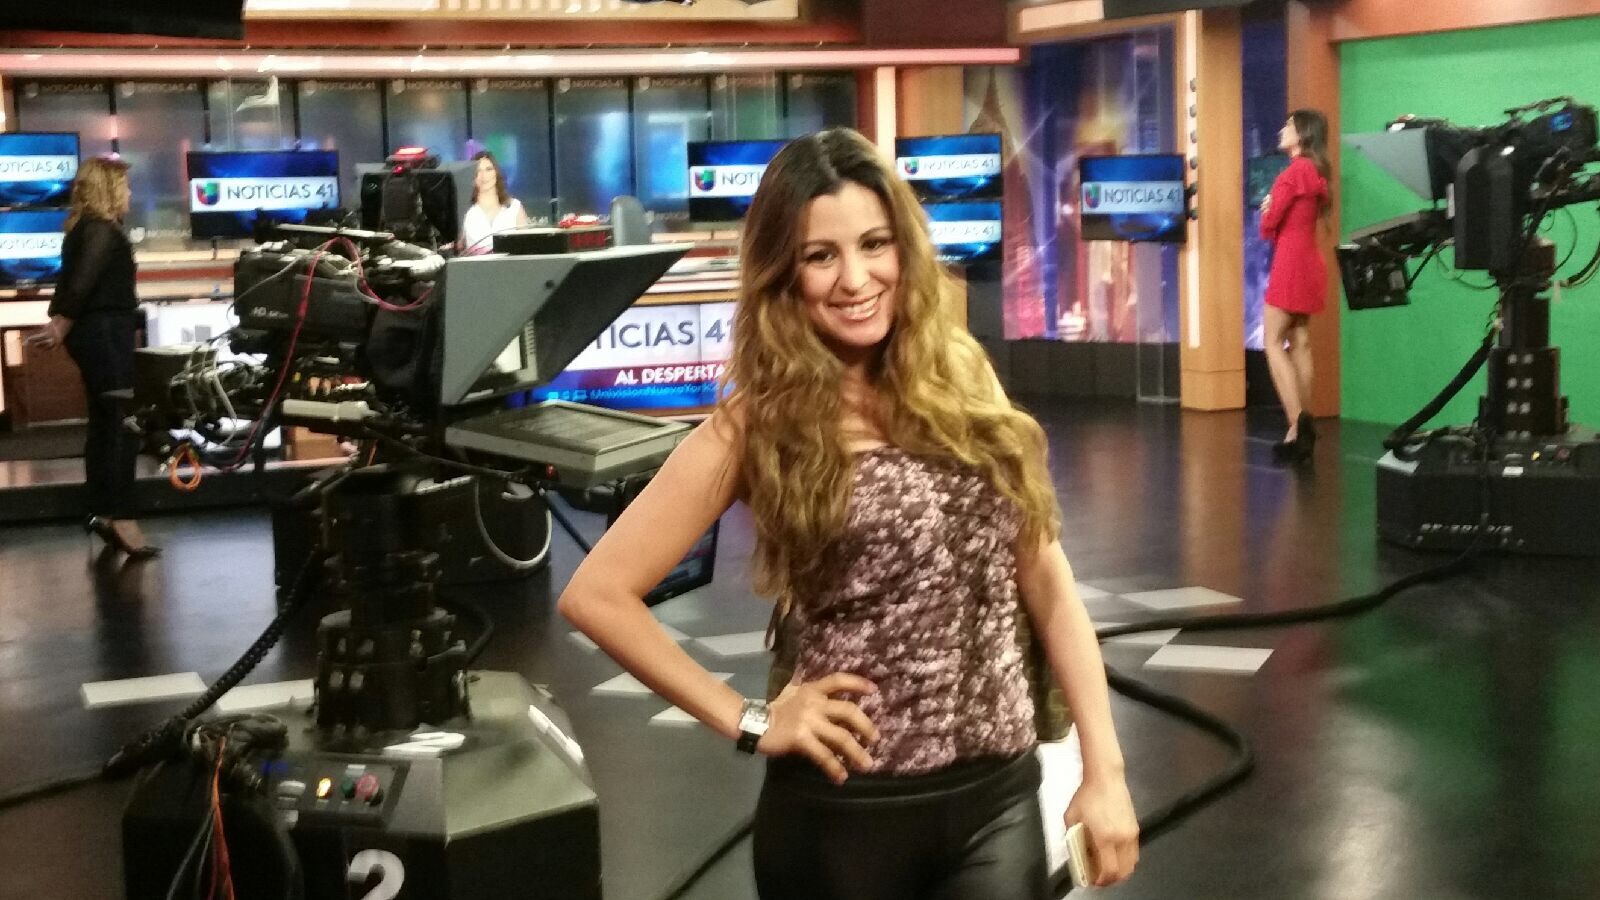 At Channel 41 Univision